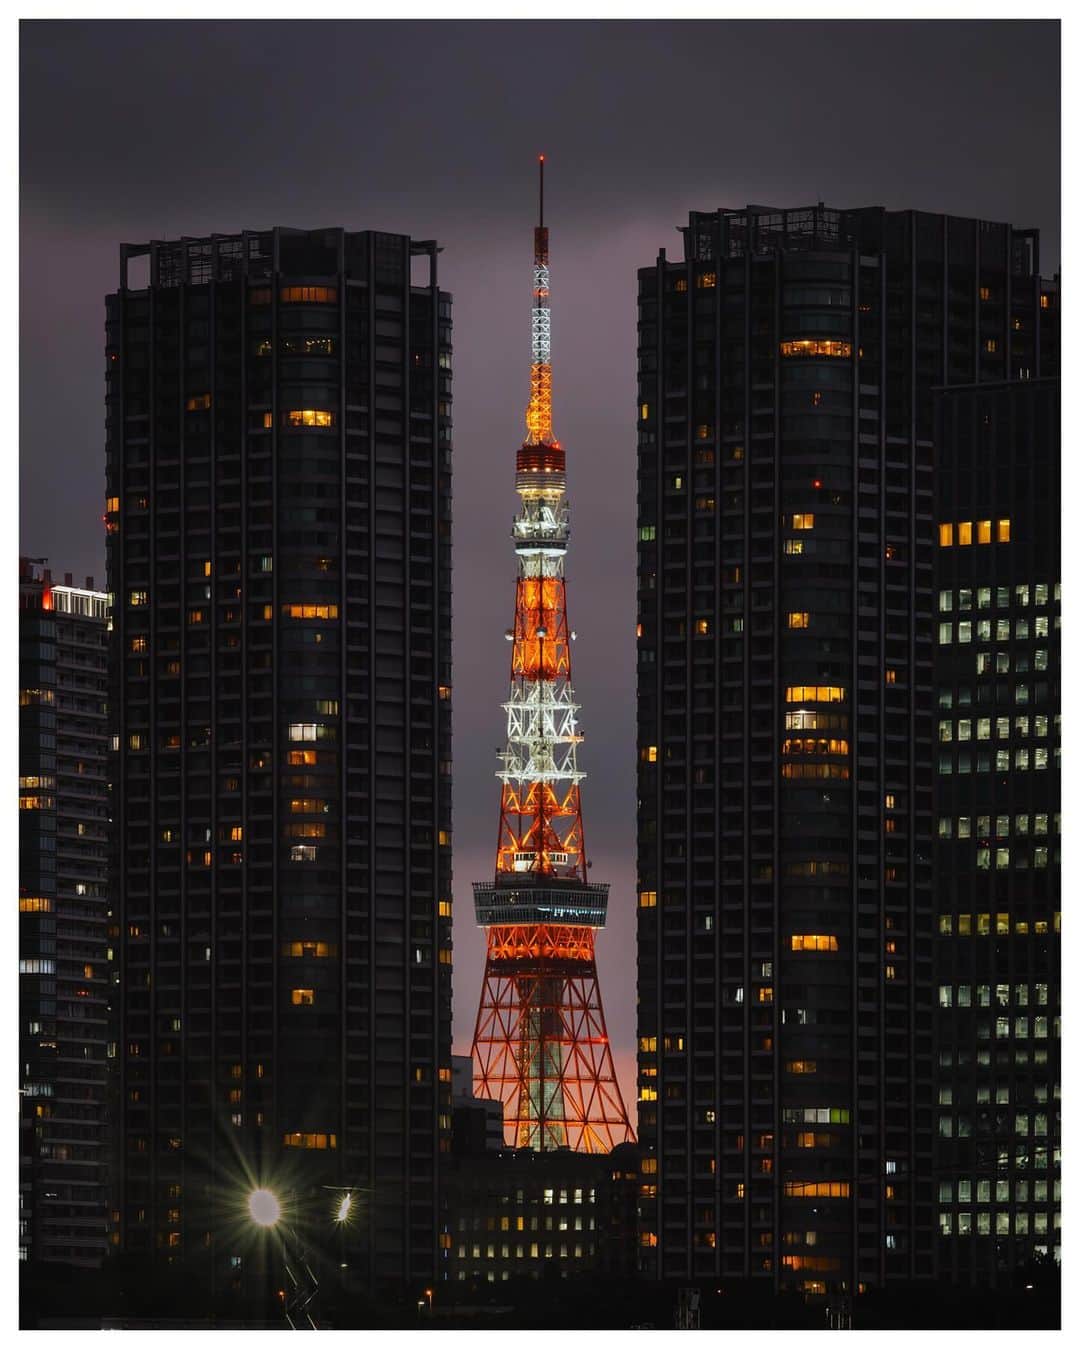 Takashi Yasuiのインスタグラム：「Tokyo 🗼 September 2020  📕My photo book - worldwide shipping daily - 🖥 Lightroom presets ▶▶Link in bio  #東京タワー #USETSU #USETSUpresets #TakashiYasui #SPiCollective #filmic_streets #ASPfeatures #photocinematica #STREETGRAMMERS #street_storytelling #bcncollective #ifyouleave #sublimestreet #streetfinder #timeless_streets #MadeWithLightroom #worldviewmag #hellofrom #reco_ig」